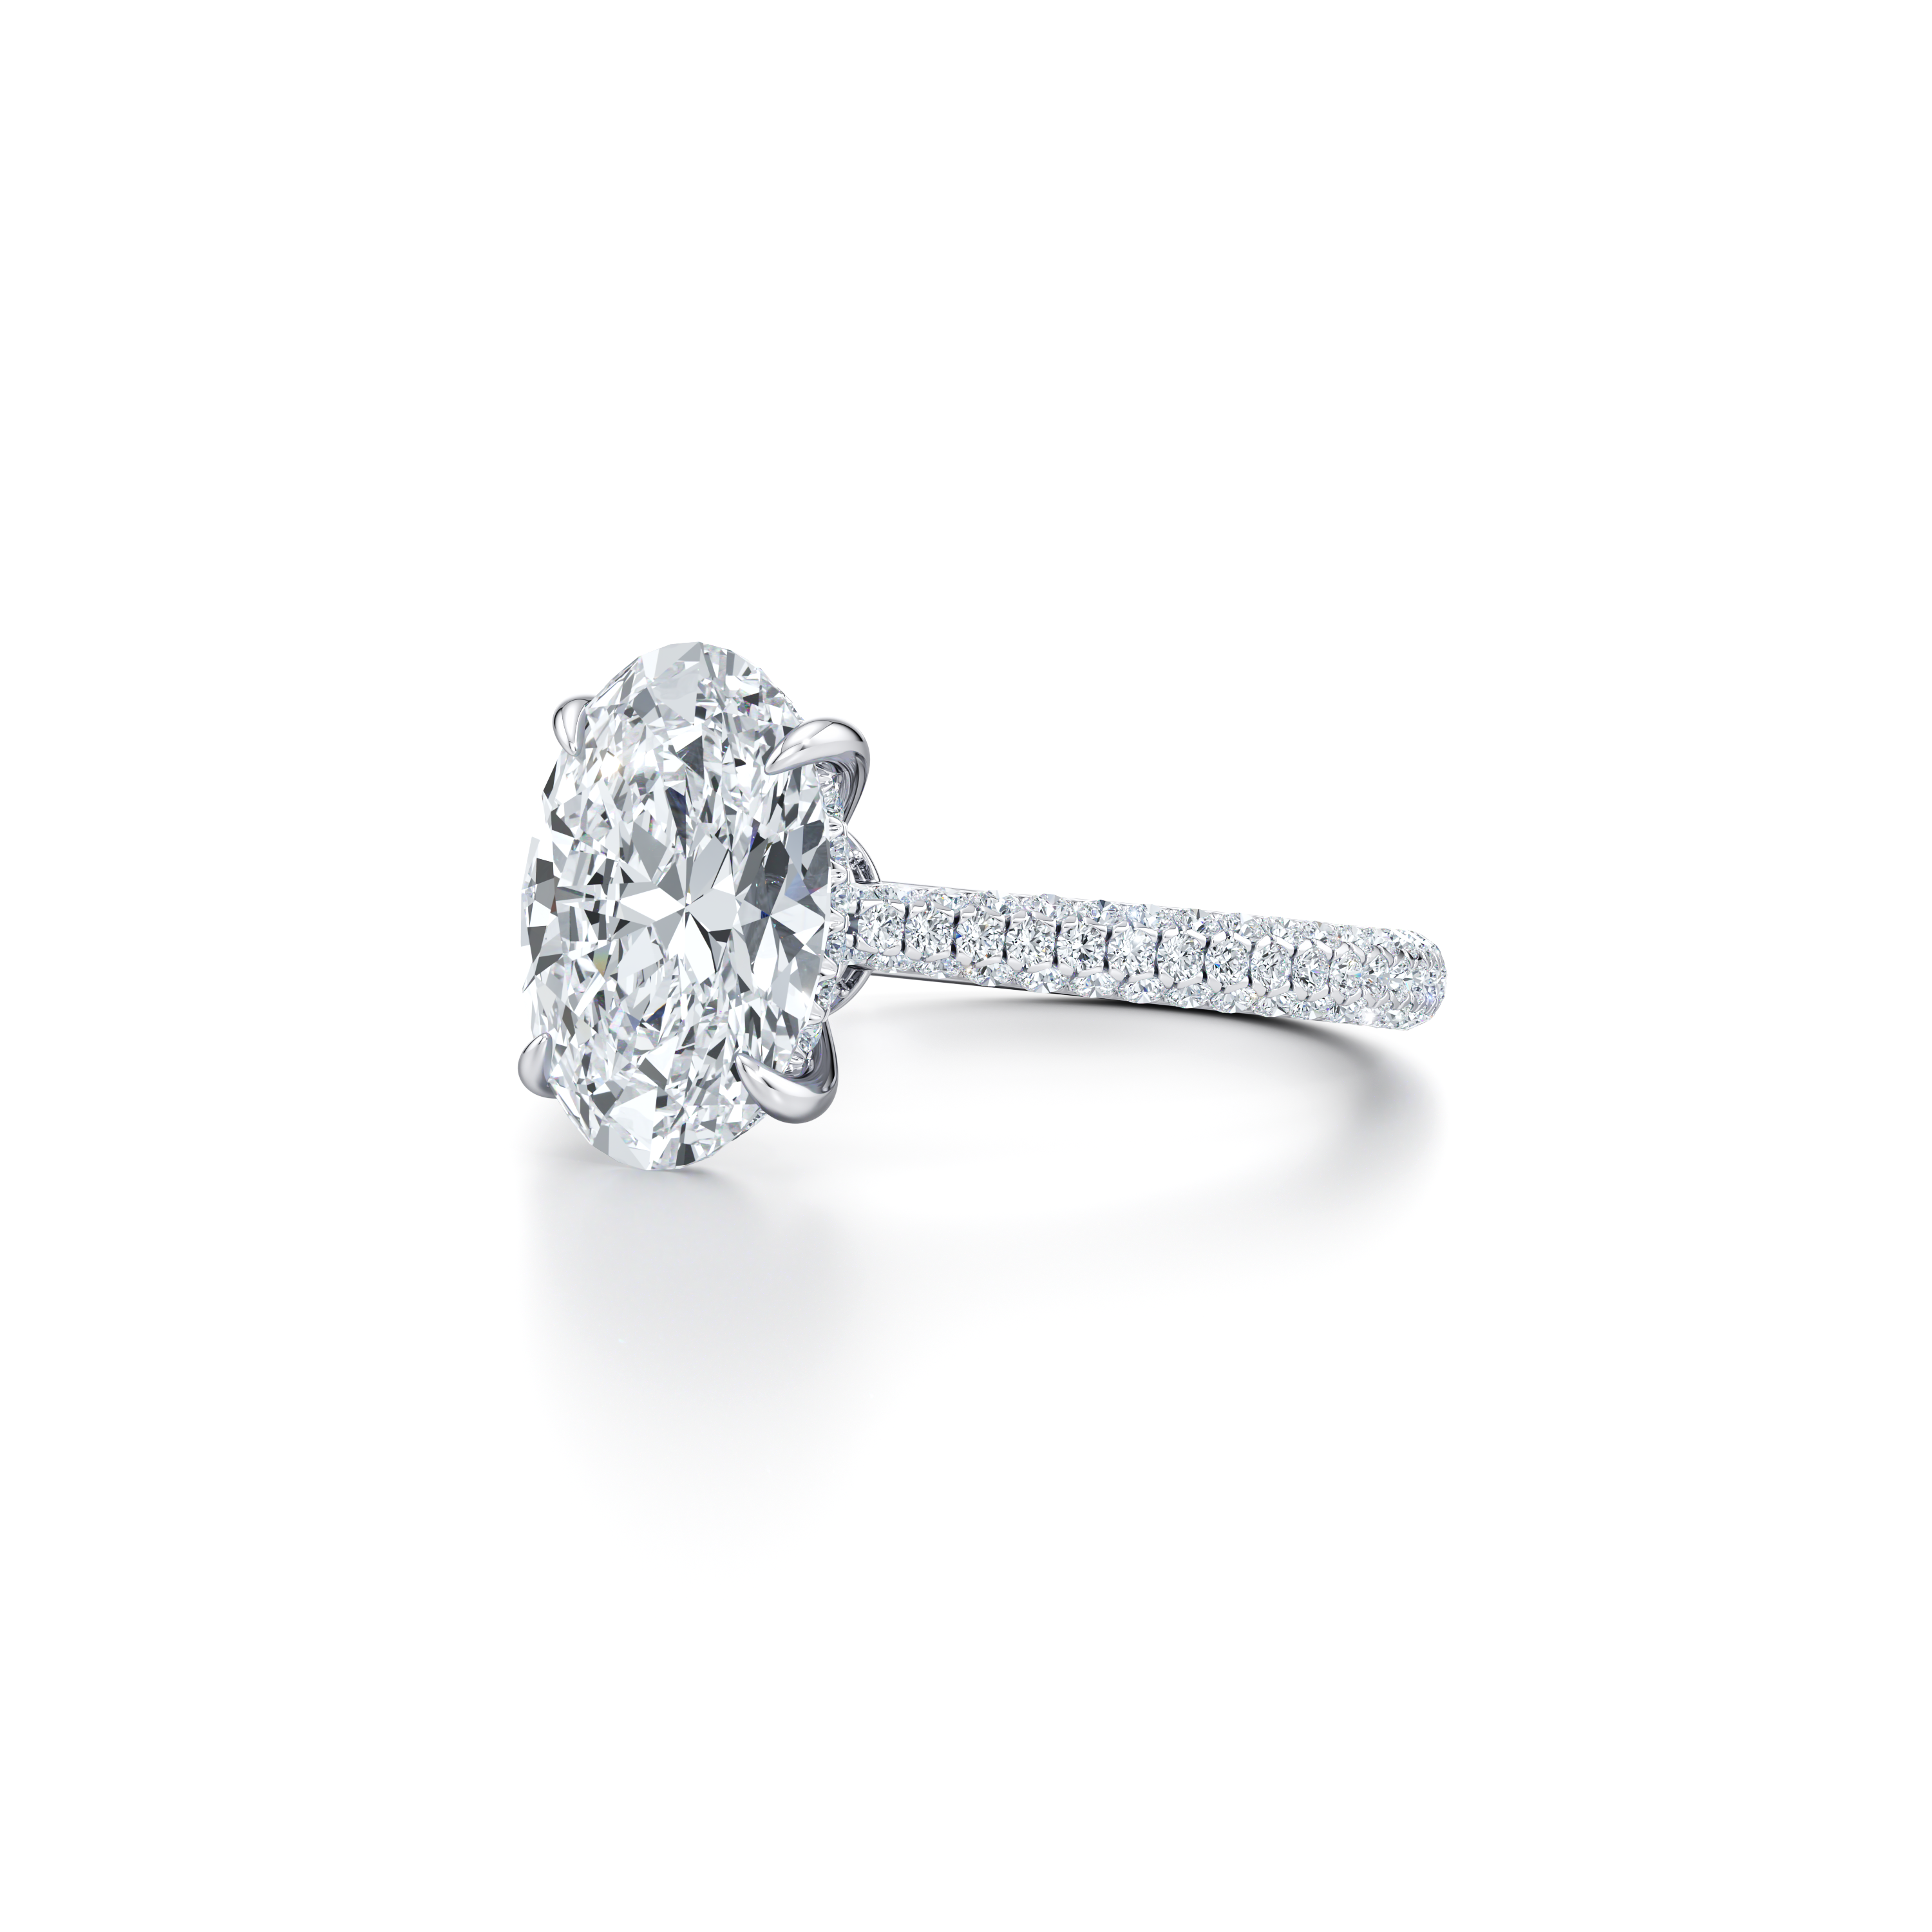 JEWELRY | 8 DESIGNER ENGAGEMENT RINGS FOR THE ULTIMATE HOLIDAY PROPOSAL